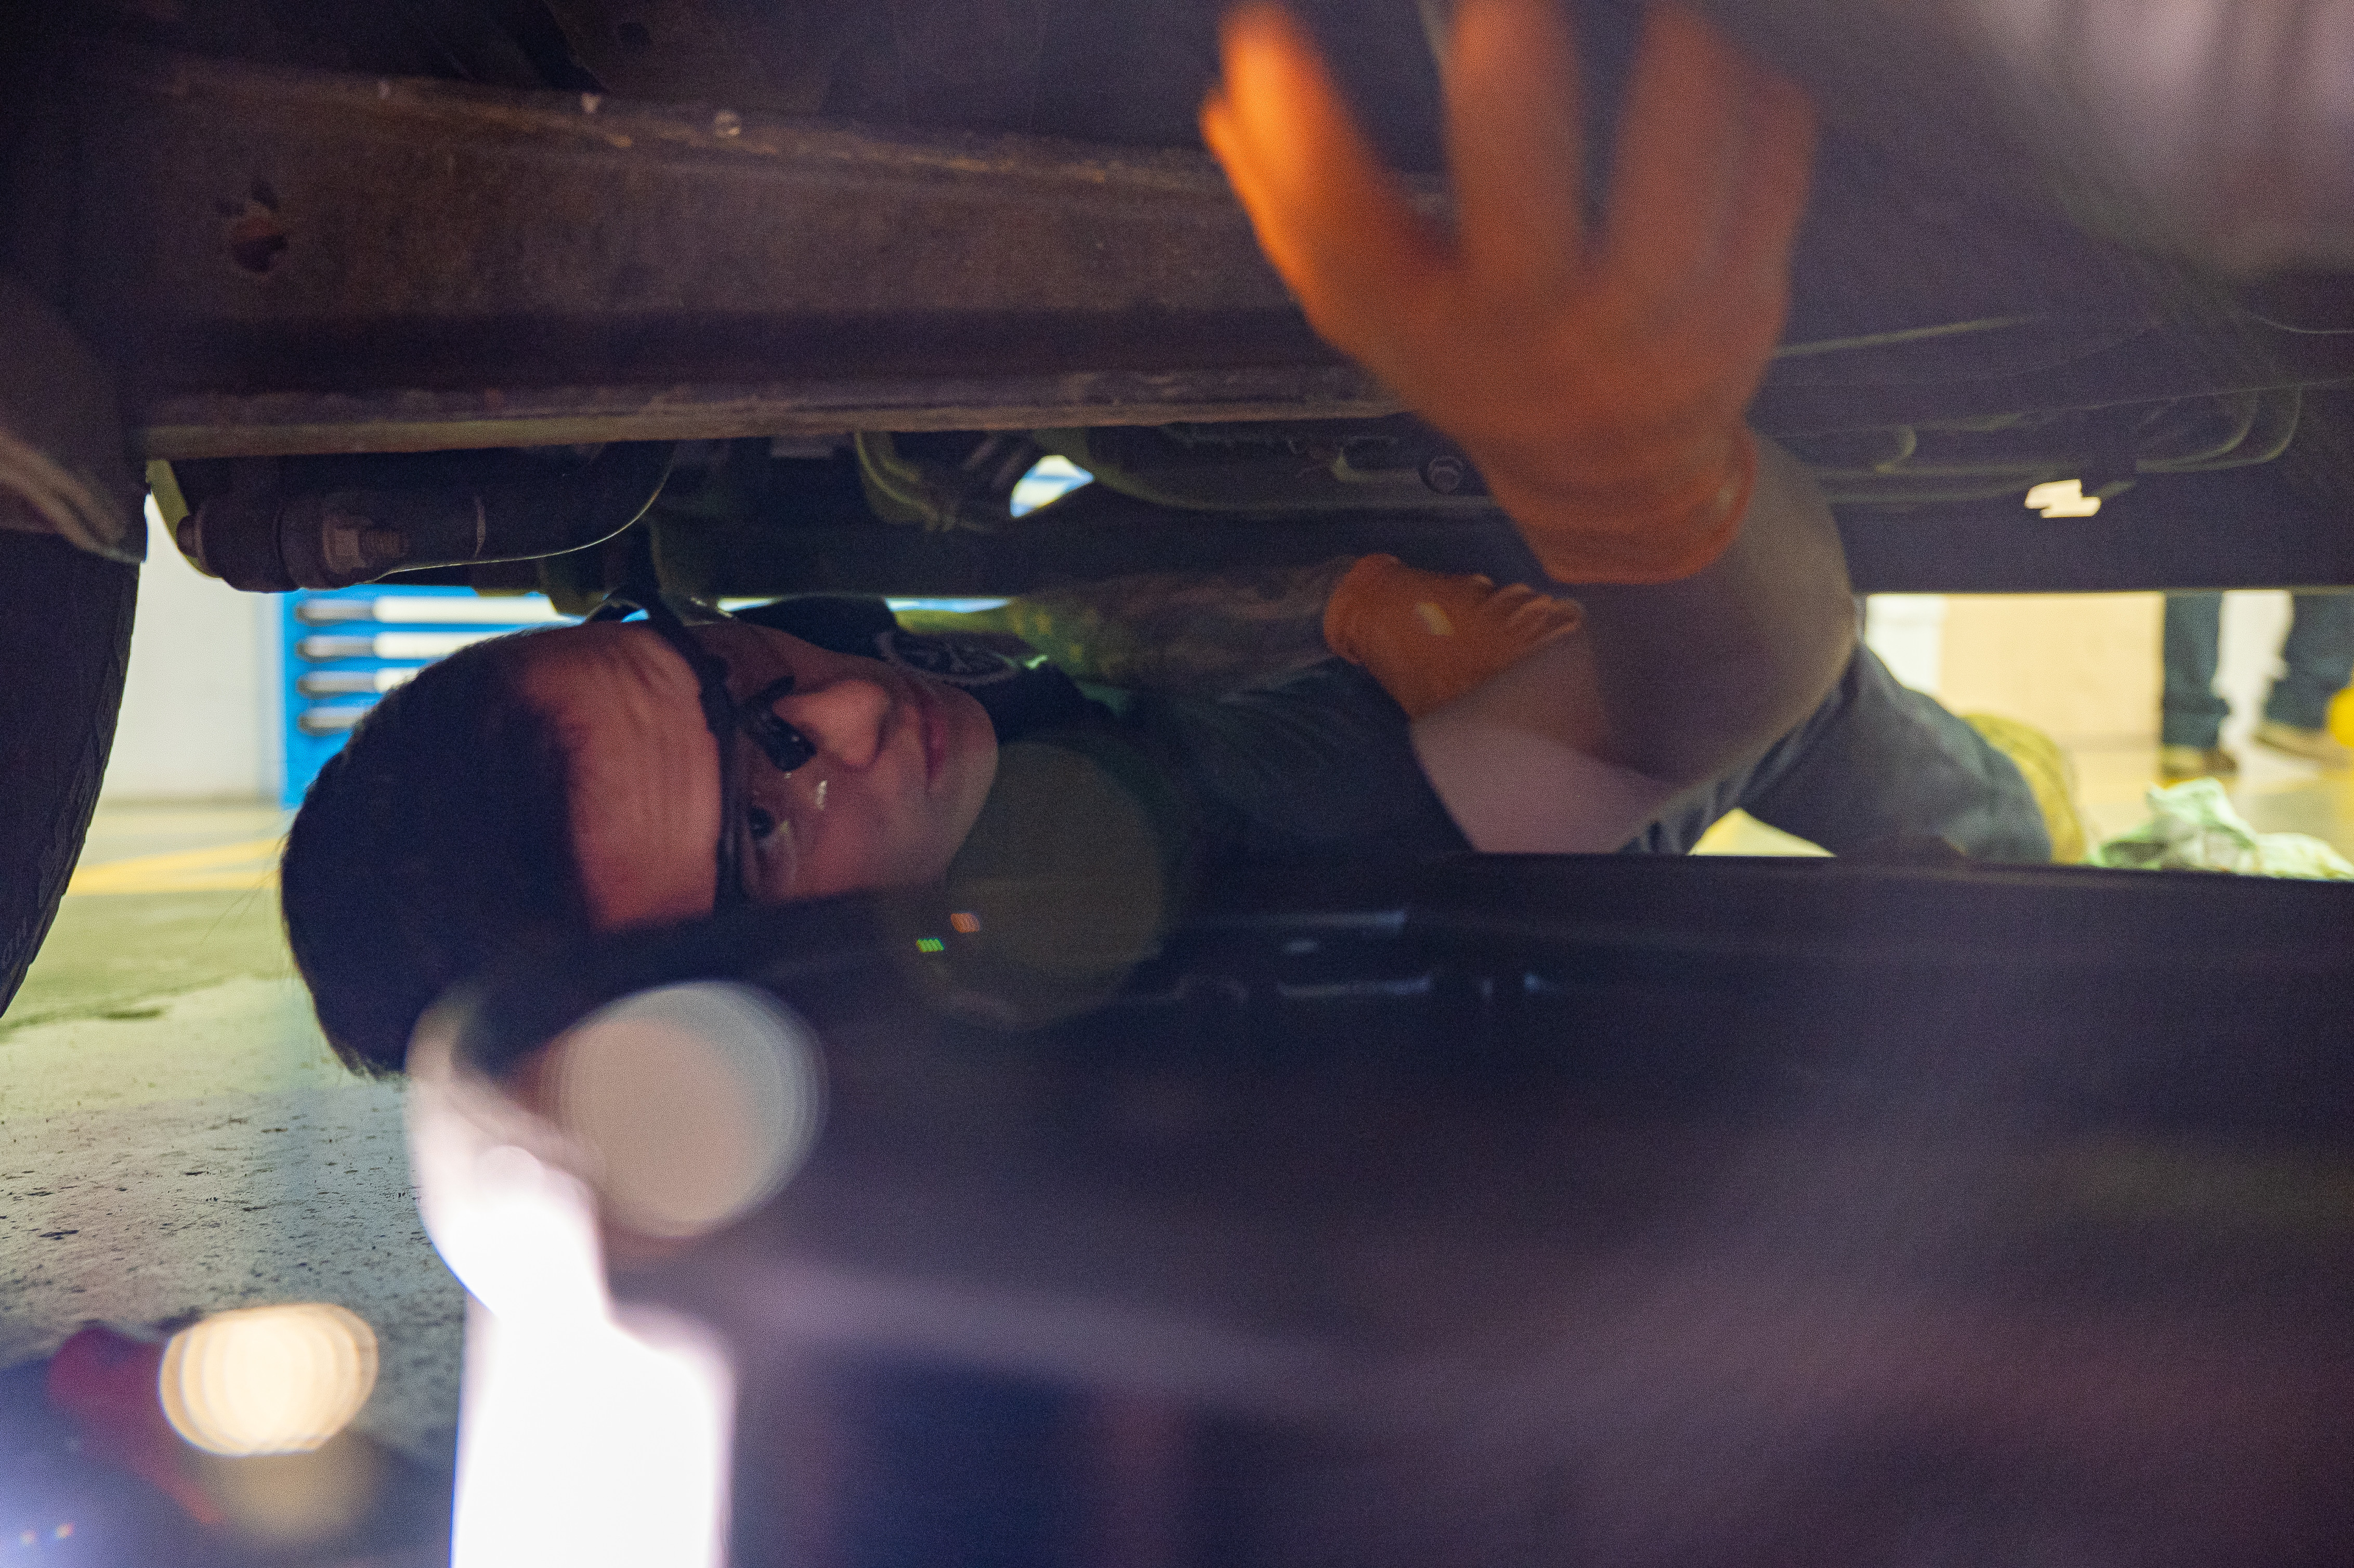 Airman changes oil in truck